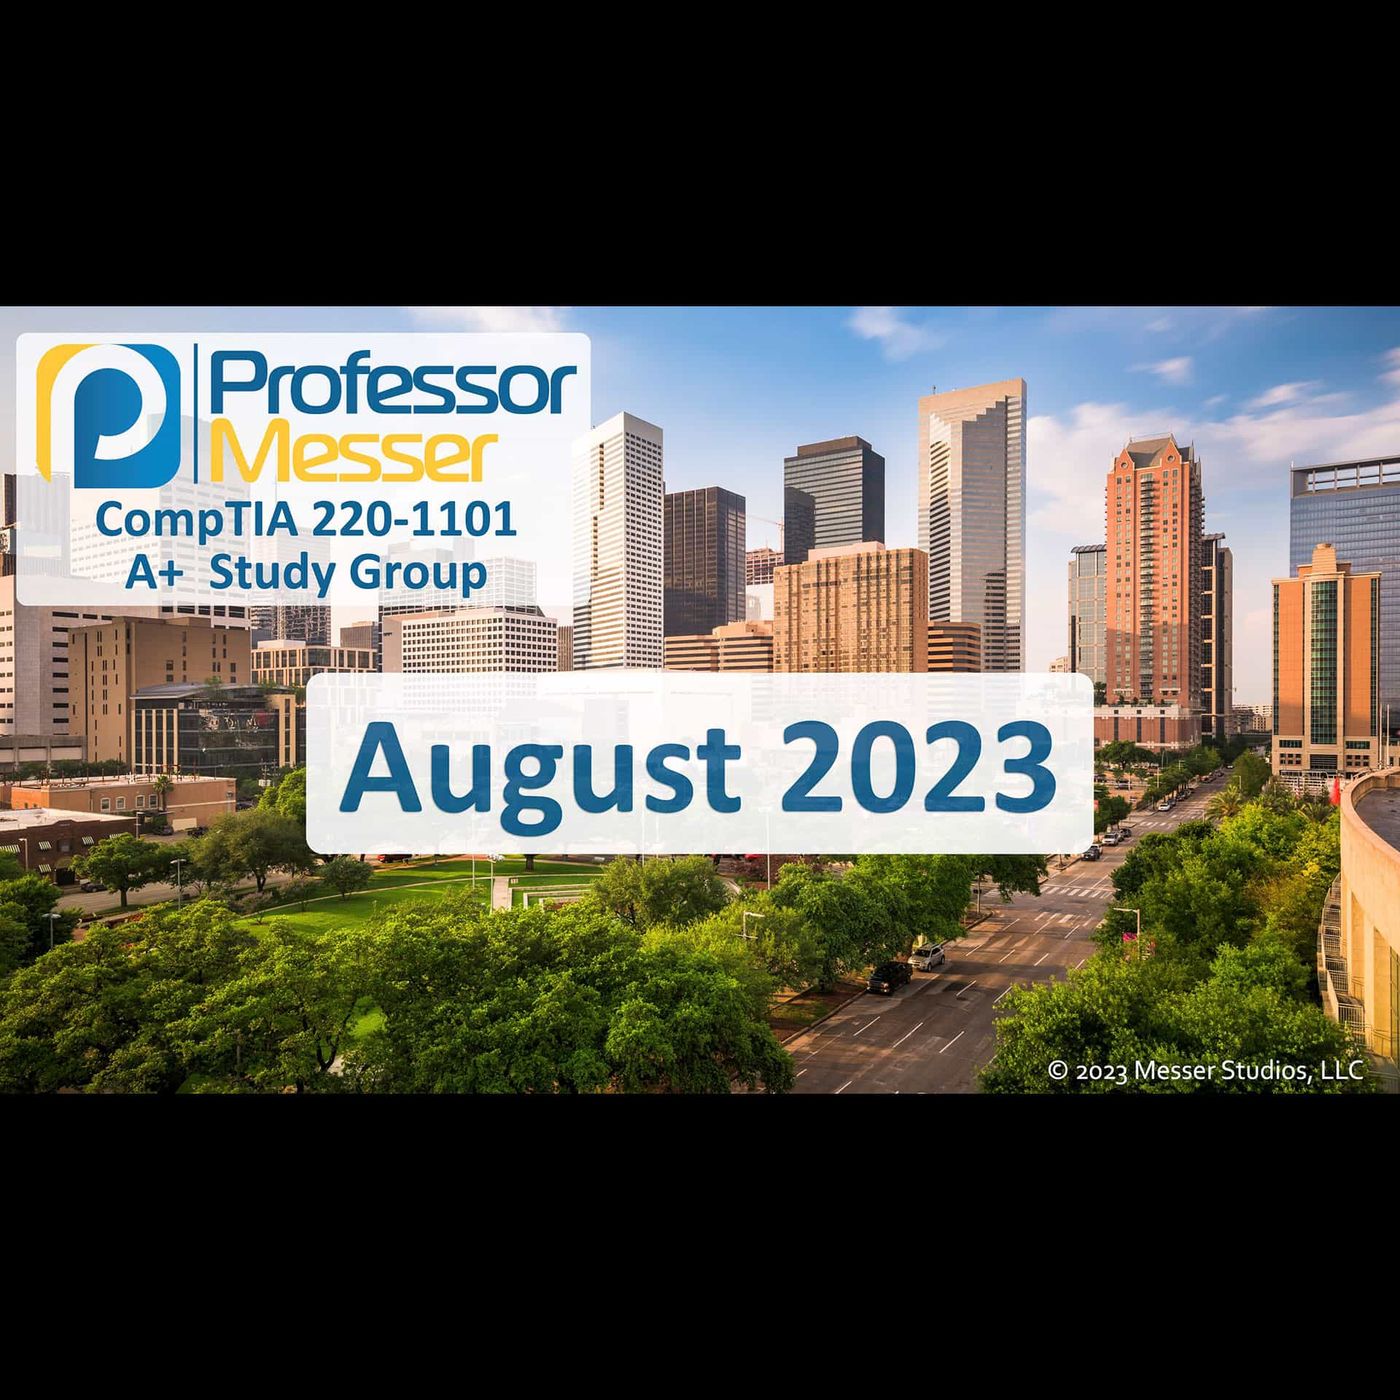 Professor Messer's CompTIA 220-1101 A+ Study Group After Show - August 2023